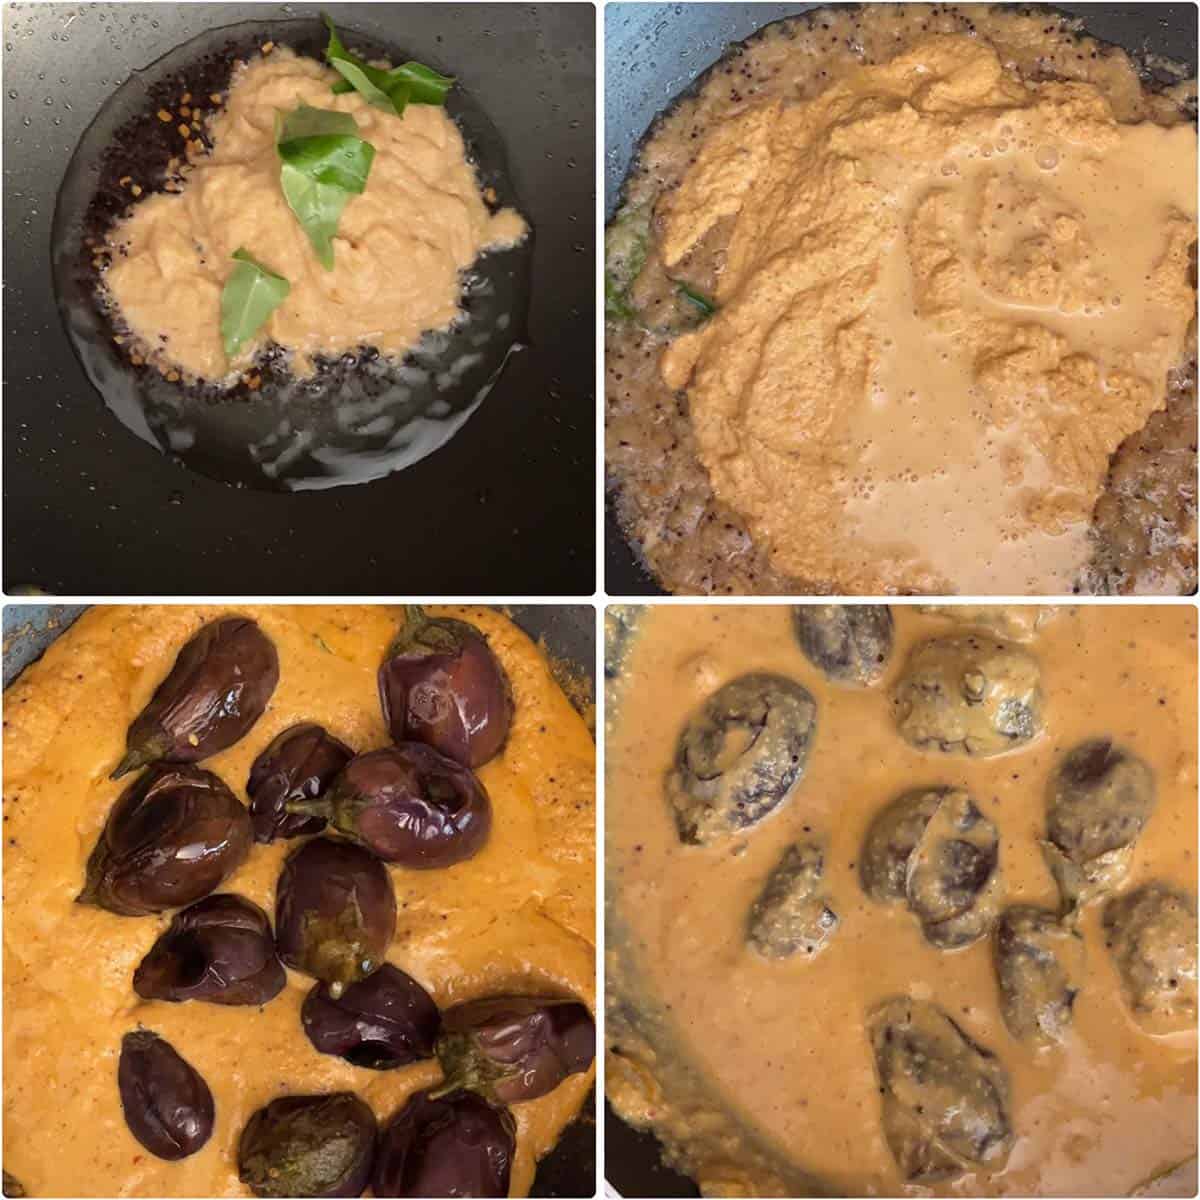 4 panel photo showing the making of brinjal curry.